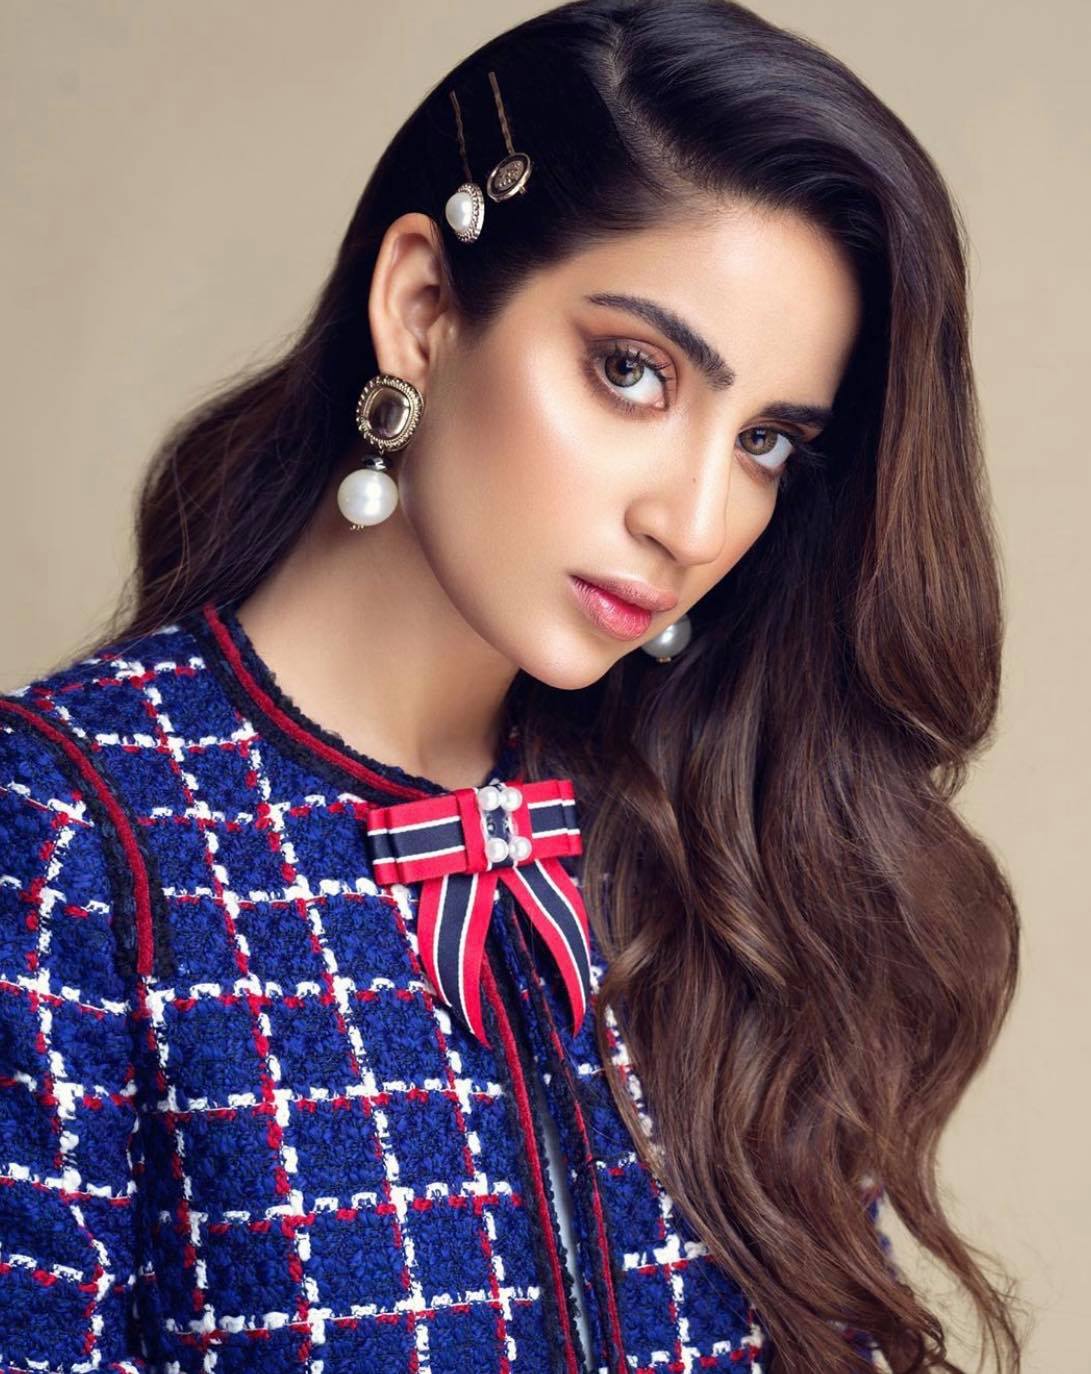 Pakistani Actresses With The Most Beautiful Eyes